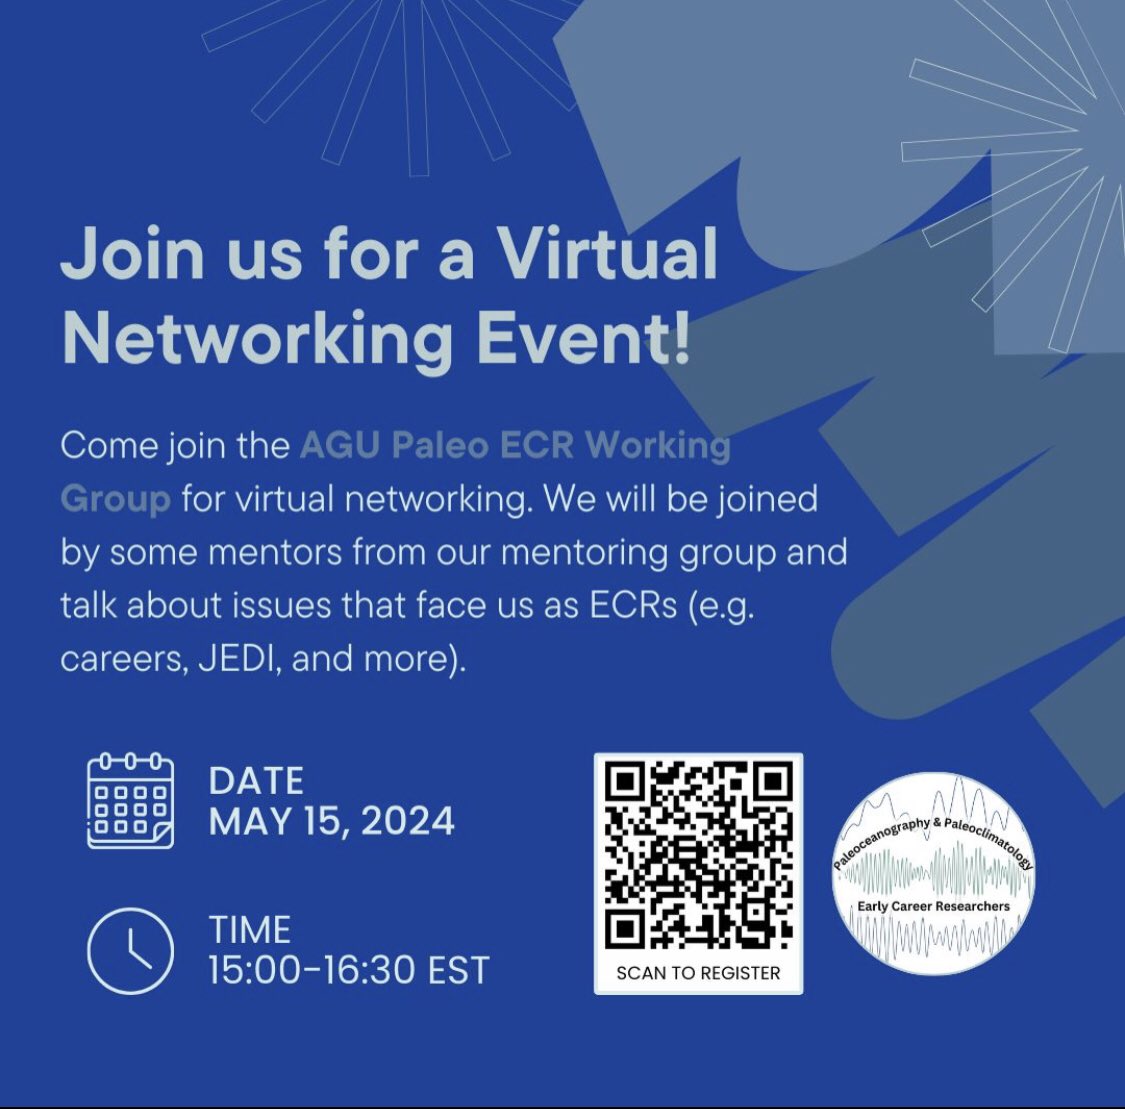 ‼️Mark Your Calendars‼️ We will be holding our annual virtual networking event on May 15th! Please find more details in the flyer and register to attend by scanning the QR code or directly via this link: agu.zoom.us/meeting/regist… We look forward to seeing you there 🤩